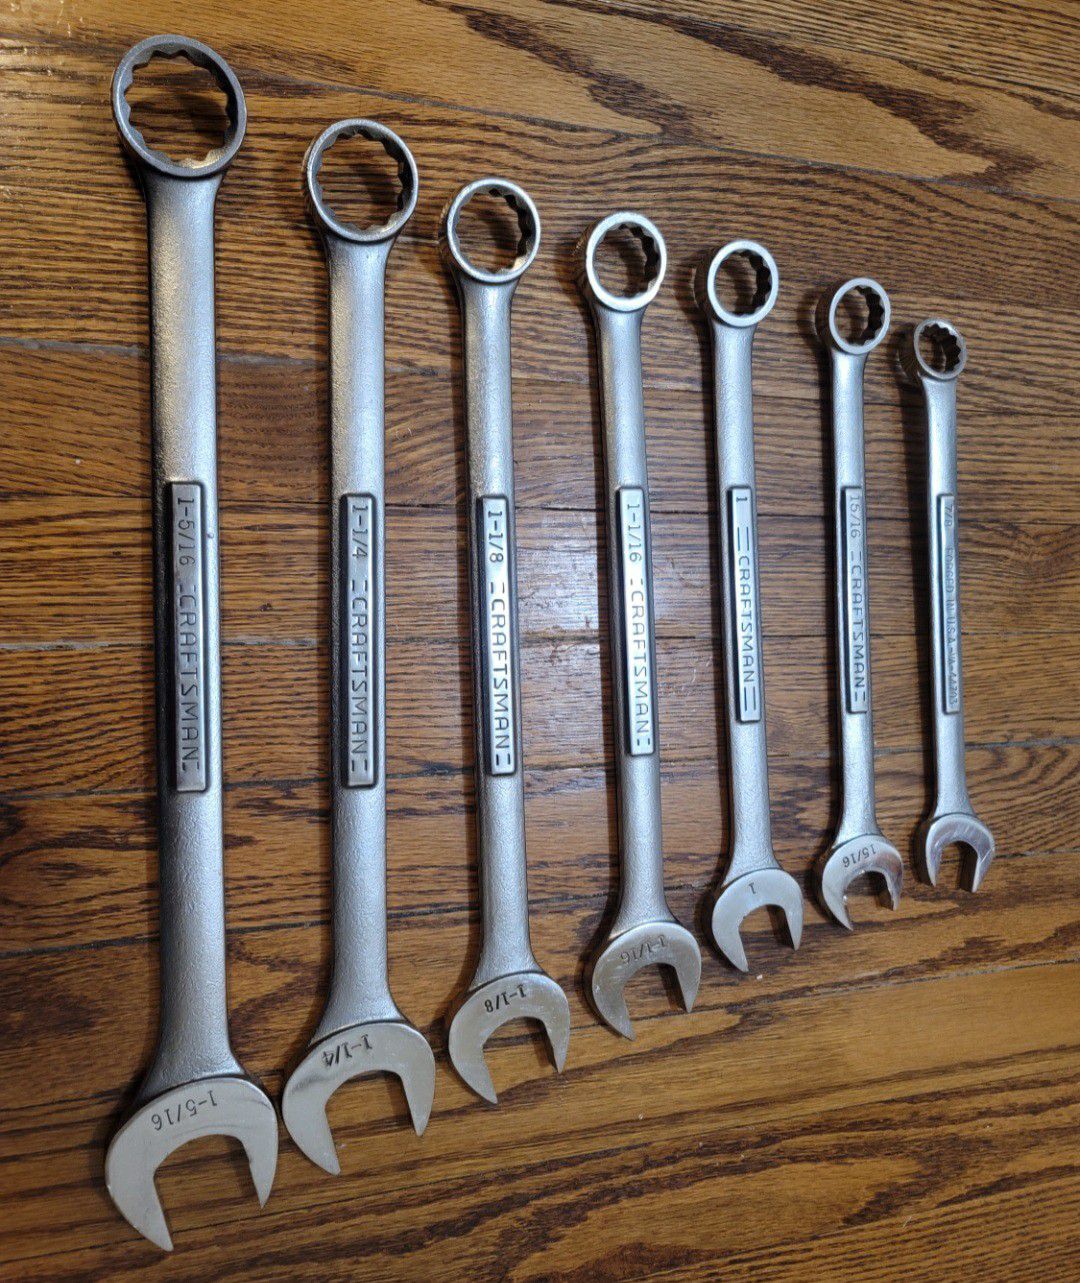 CRAFTSMAN 12 PT LARGE COMBINATION WRENCH SET 7 PIECE 7/8” to 1-5/16” USA FORGED